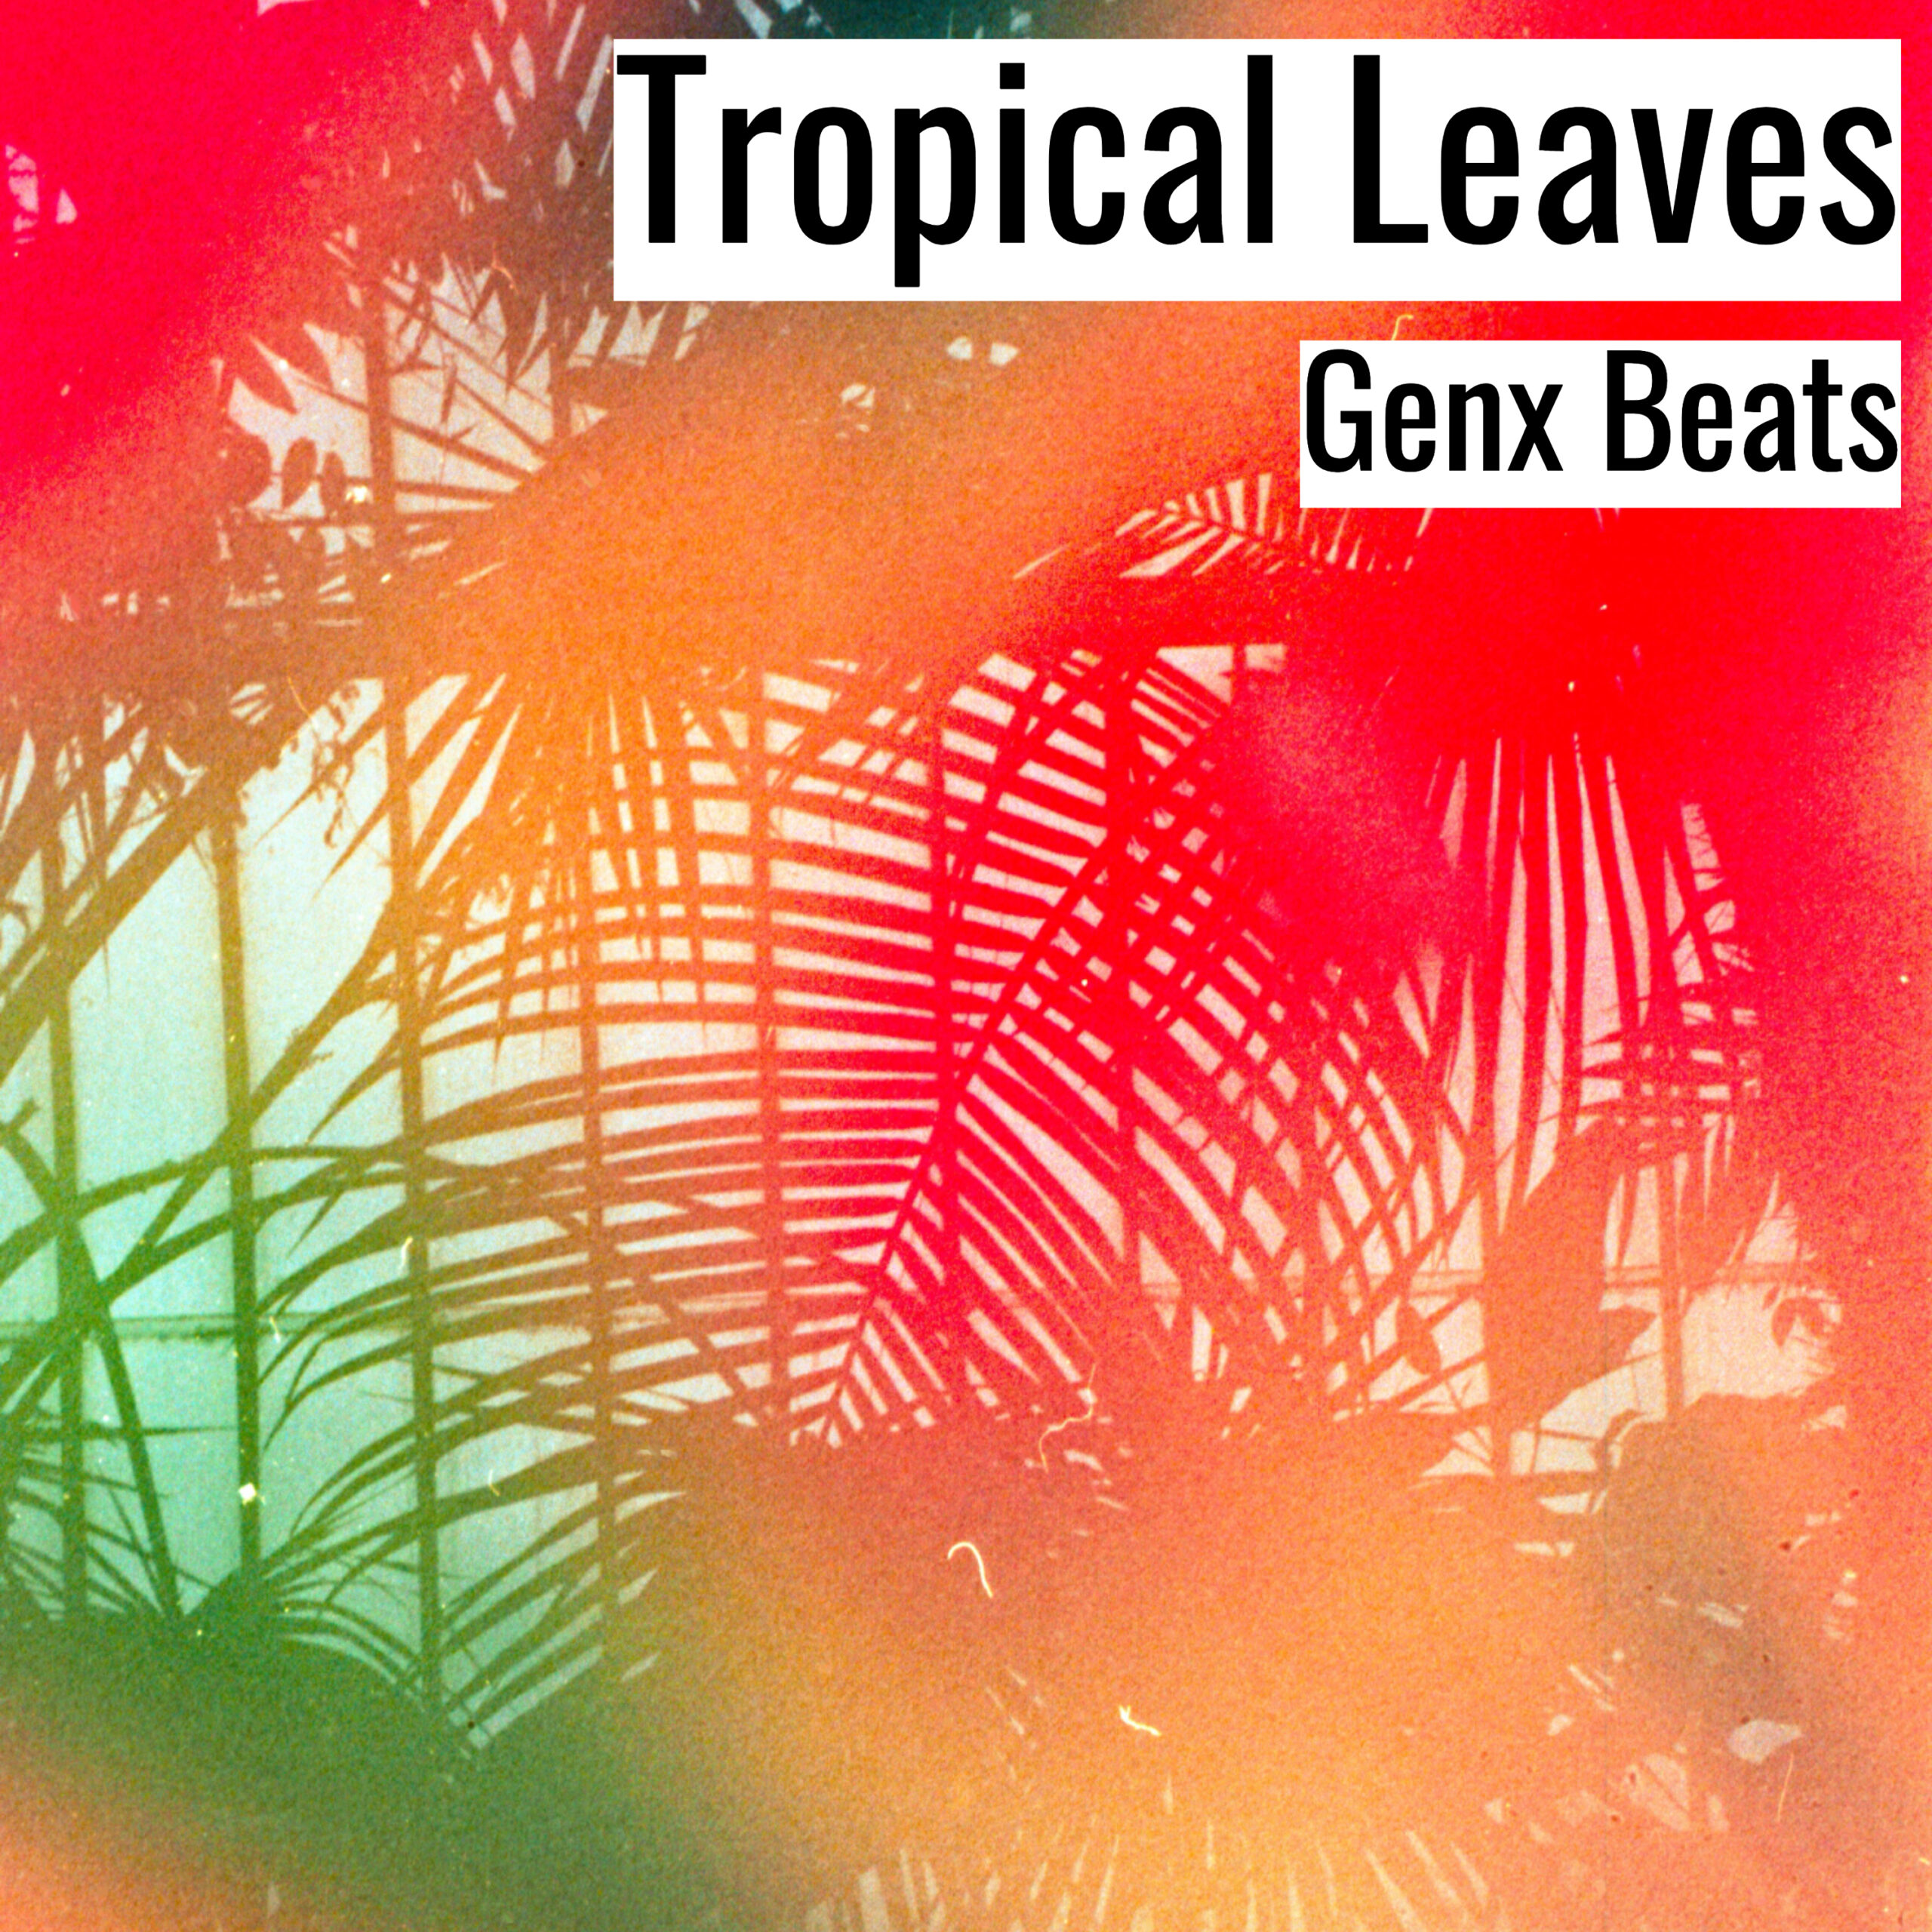 Tropical Leaves scaled